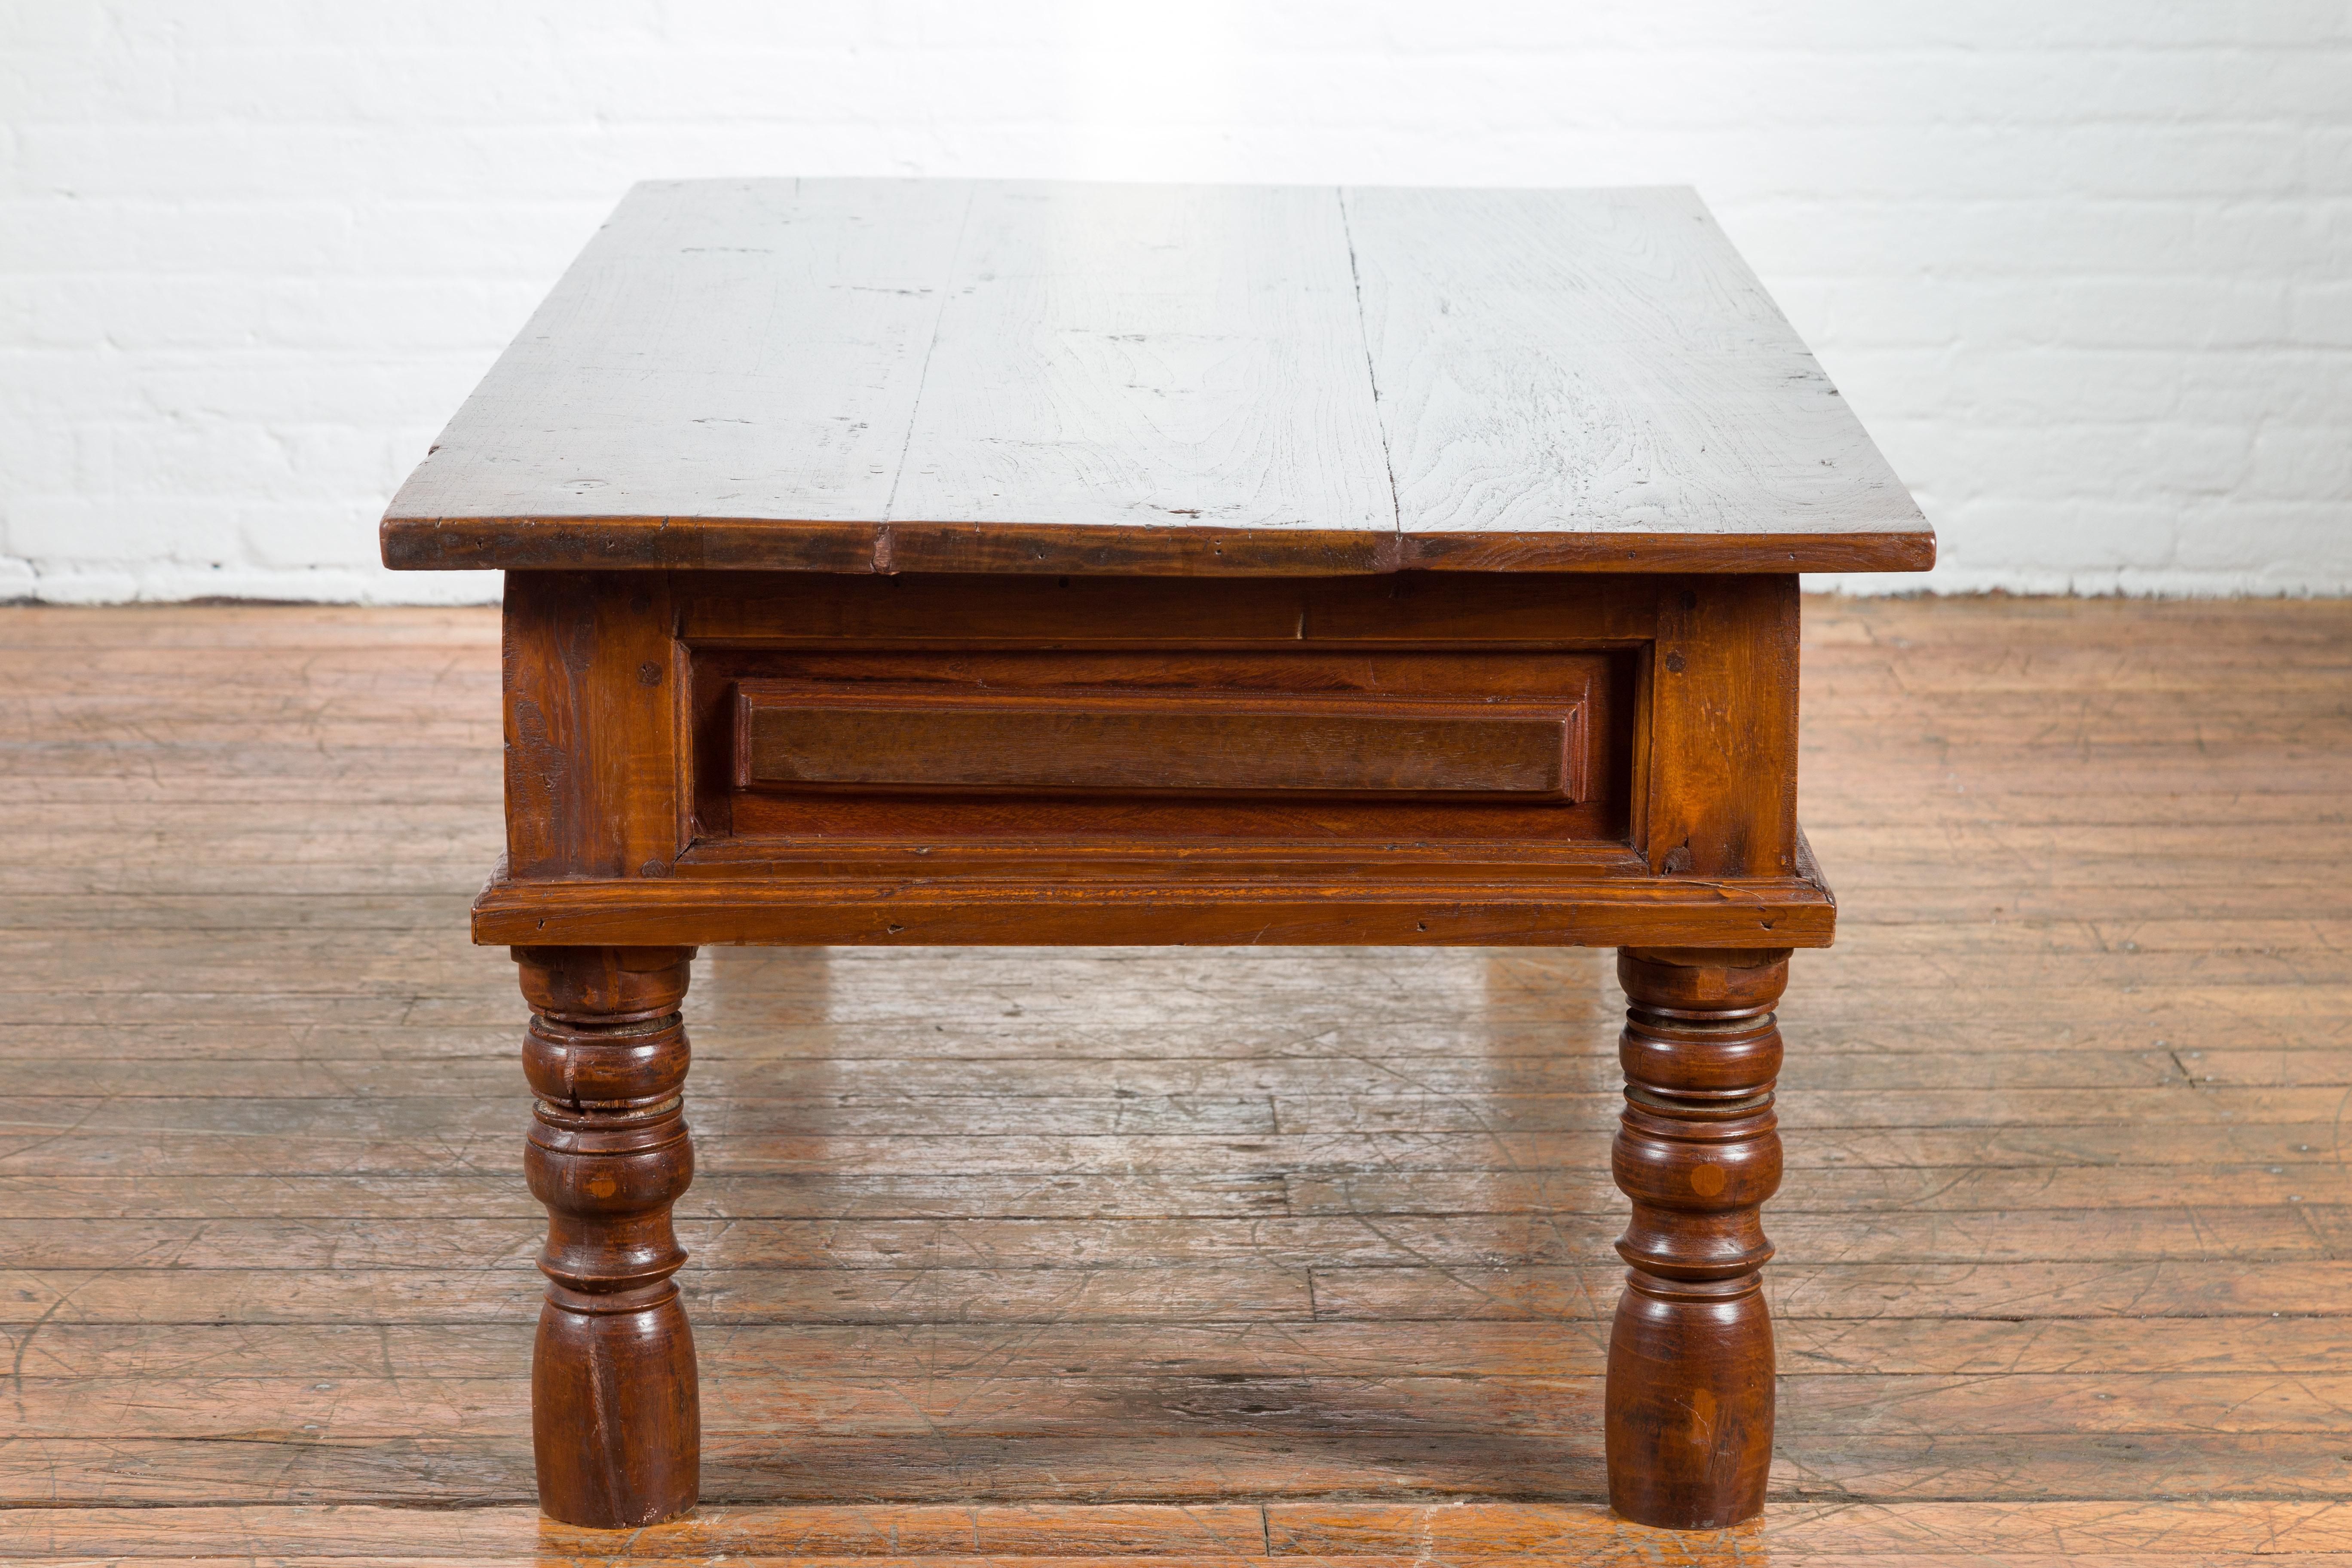 20th Century Vintage Indian Wooden Coffee Table with Two Drawers and Baluster Legs For Sale